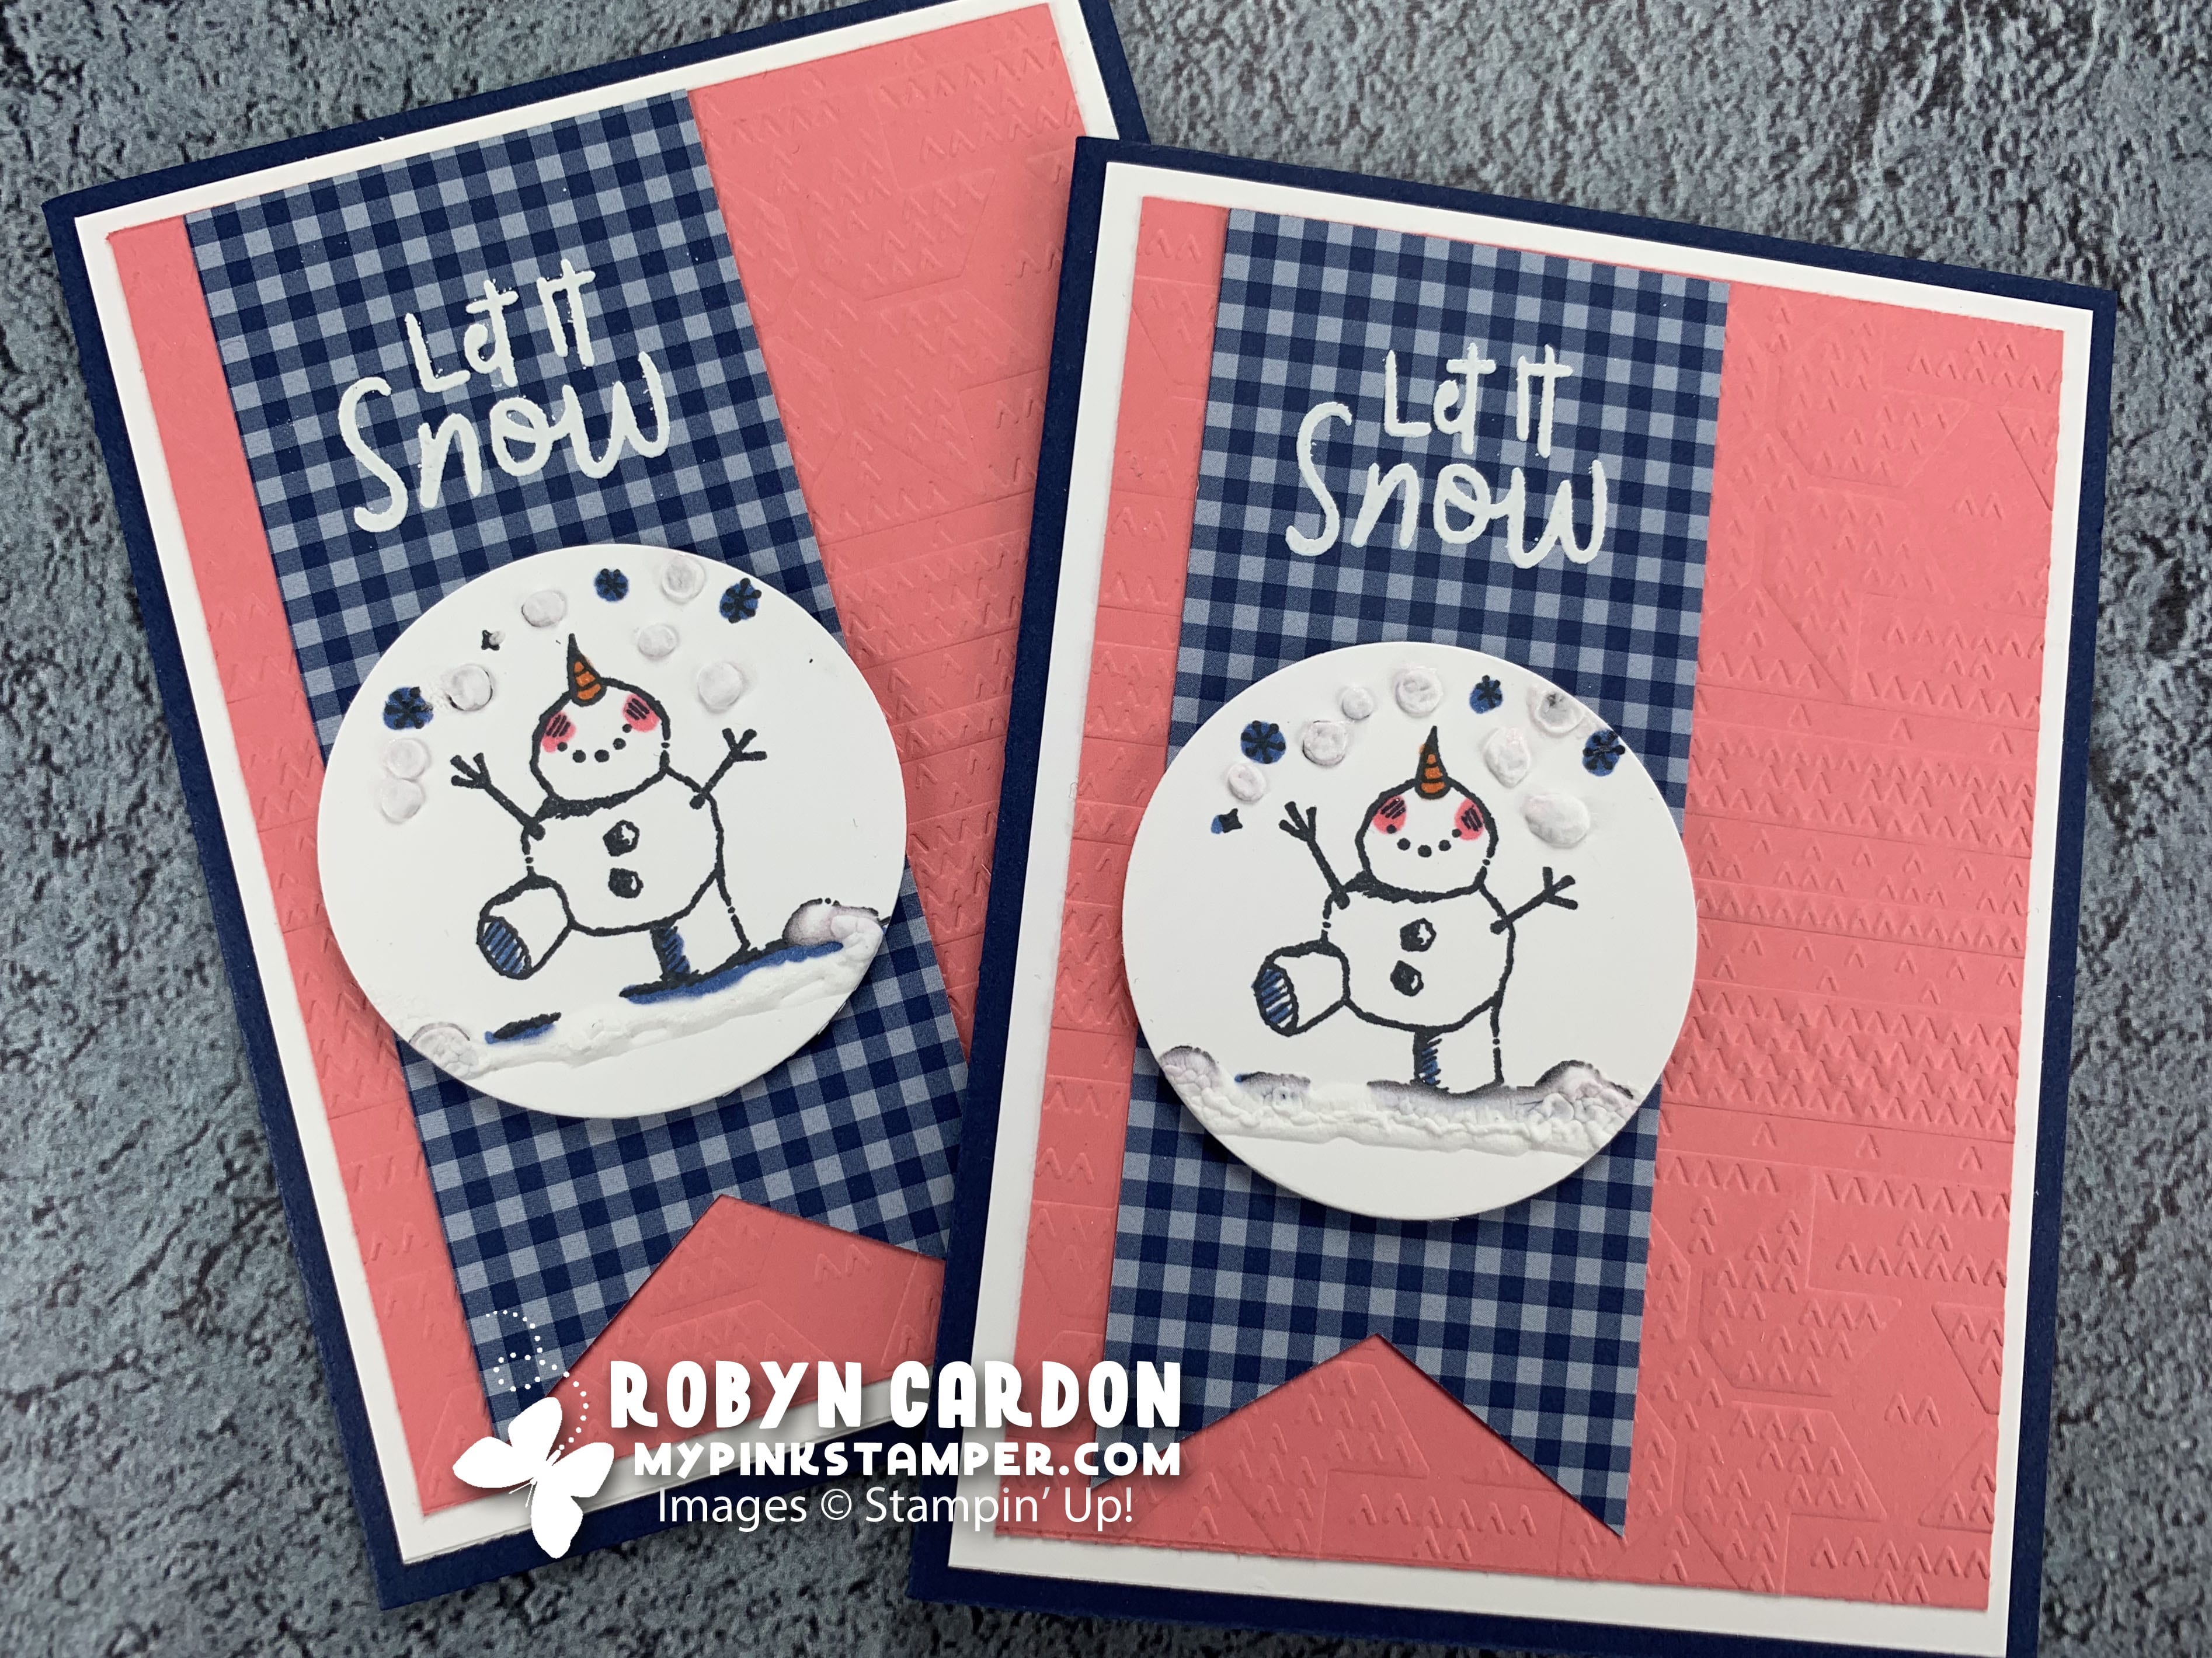 Days 18-21 – Blog-tober with 4 Giveaways & NEW Video – Episode 728 Snowman Season Puff Paint